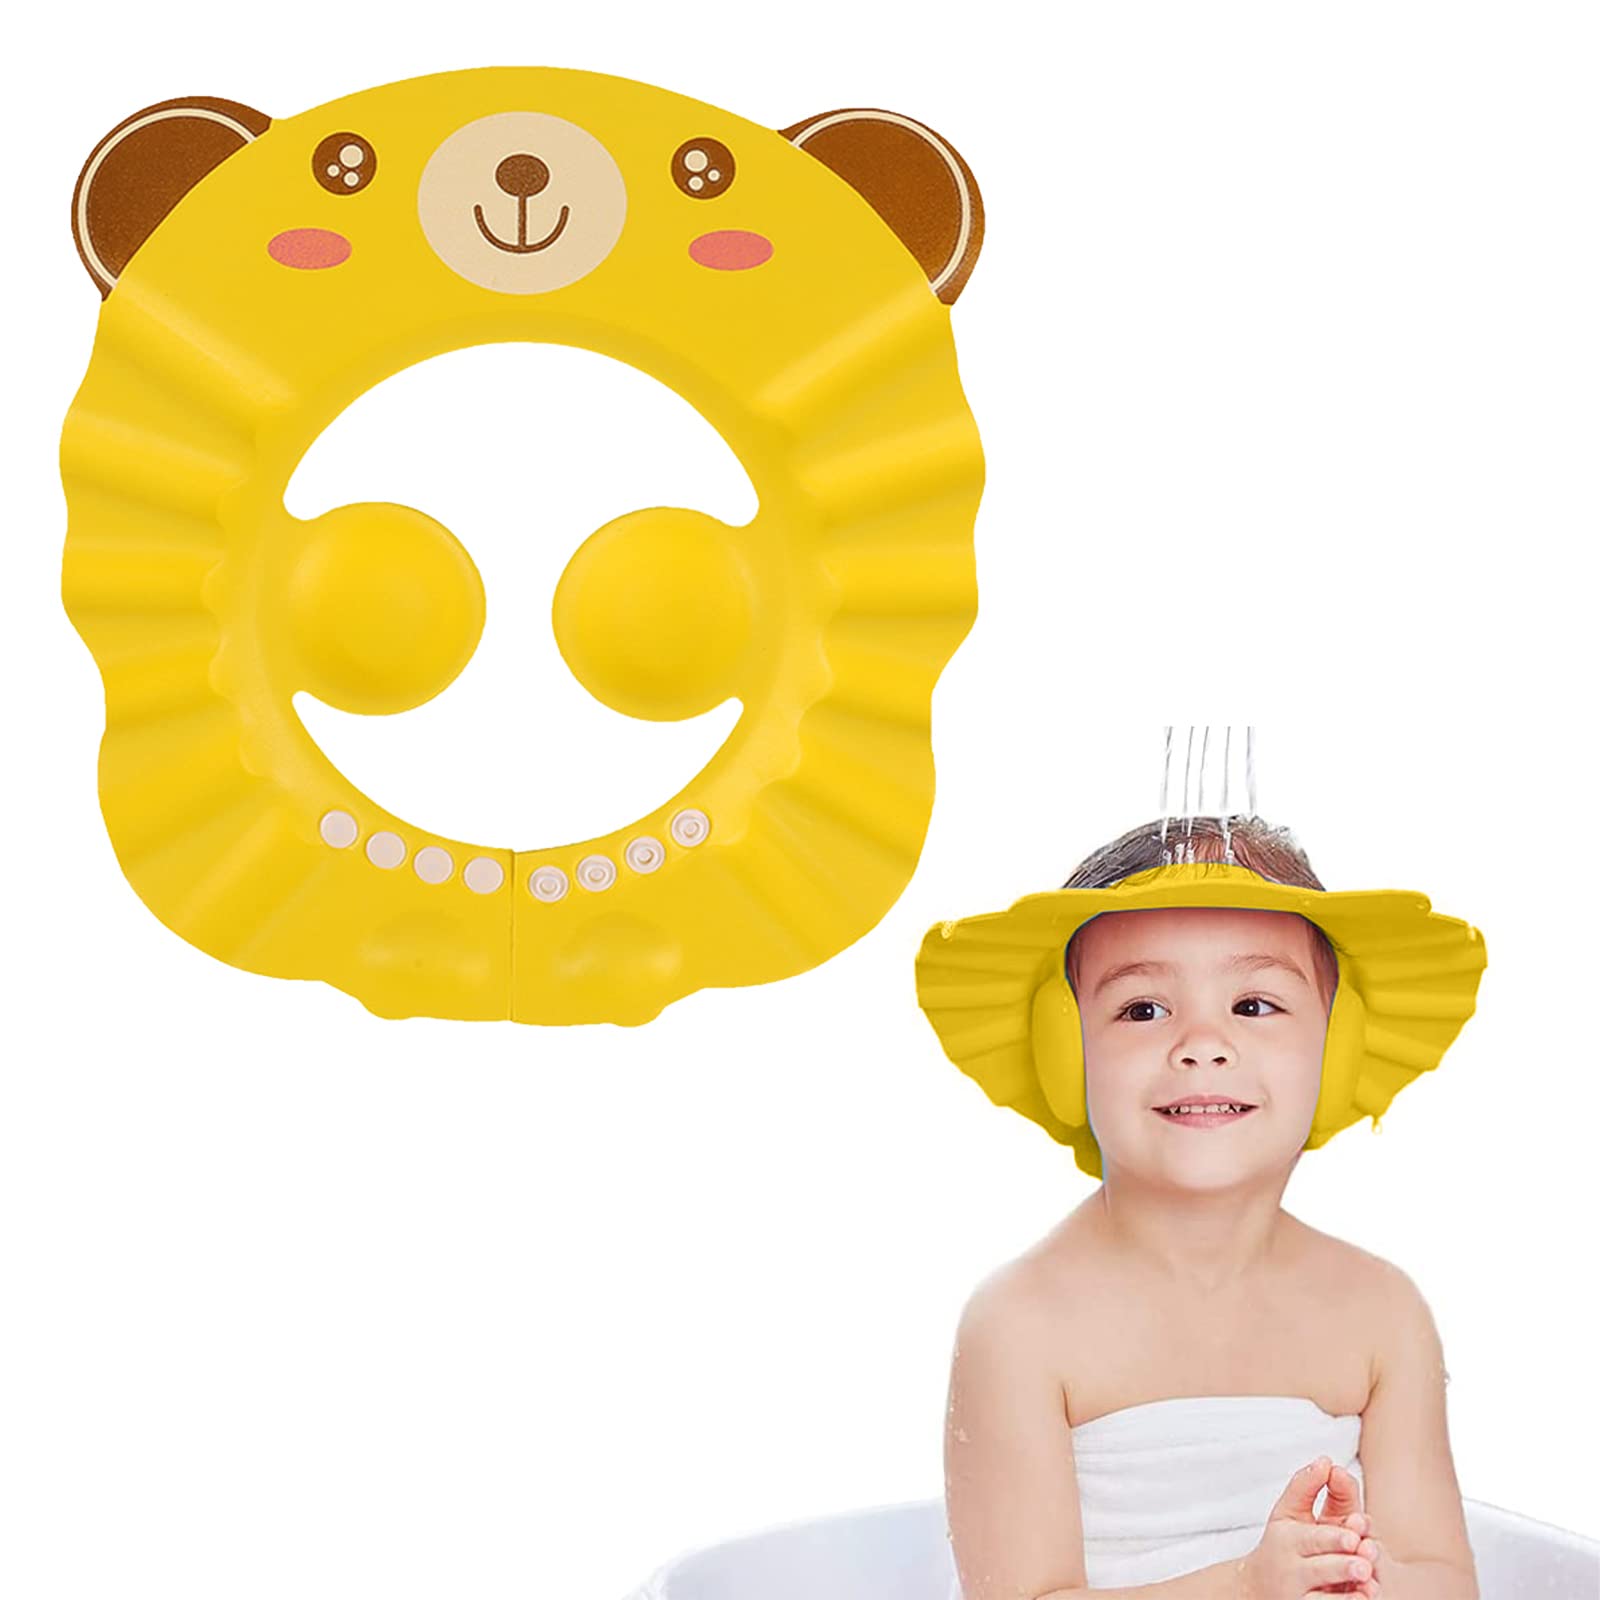 Kid Shampoo Cap Adjustable,Baby Shower Cap with Ear Protection,Baby Shower Hat,Hair Washing Shampoo Shield for Eyes Ear and Face,for Toddlers Kids Infants